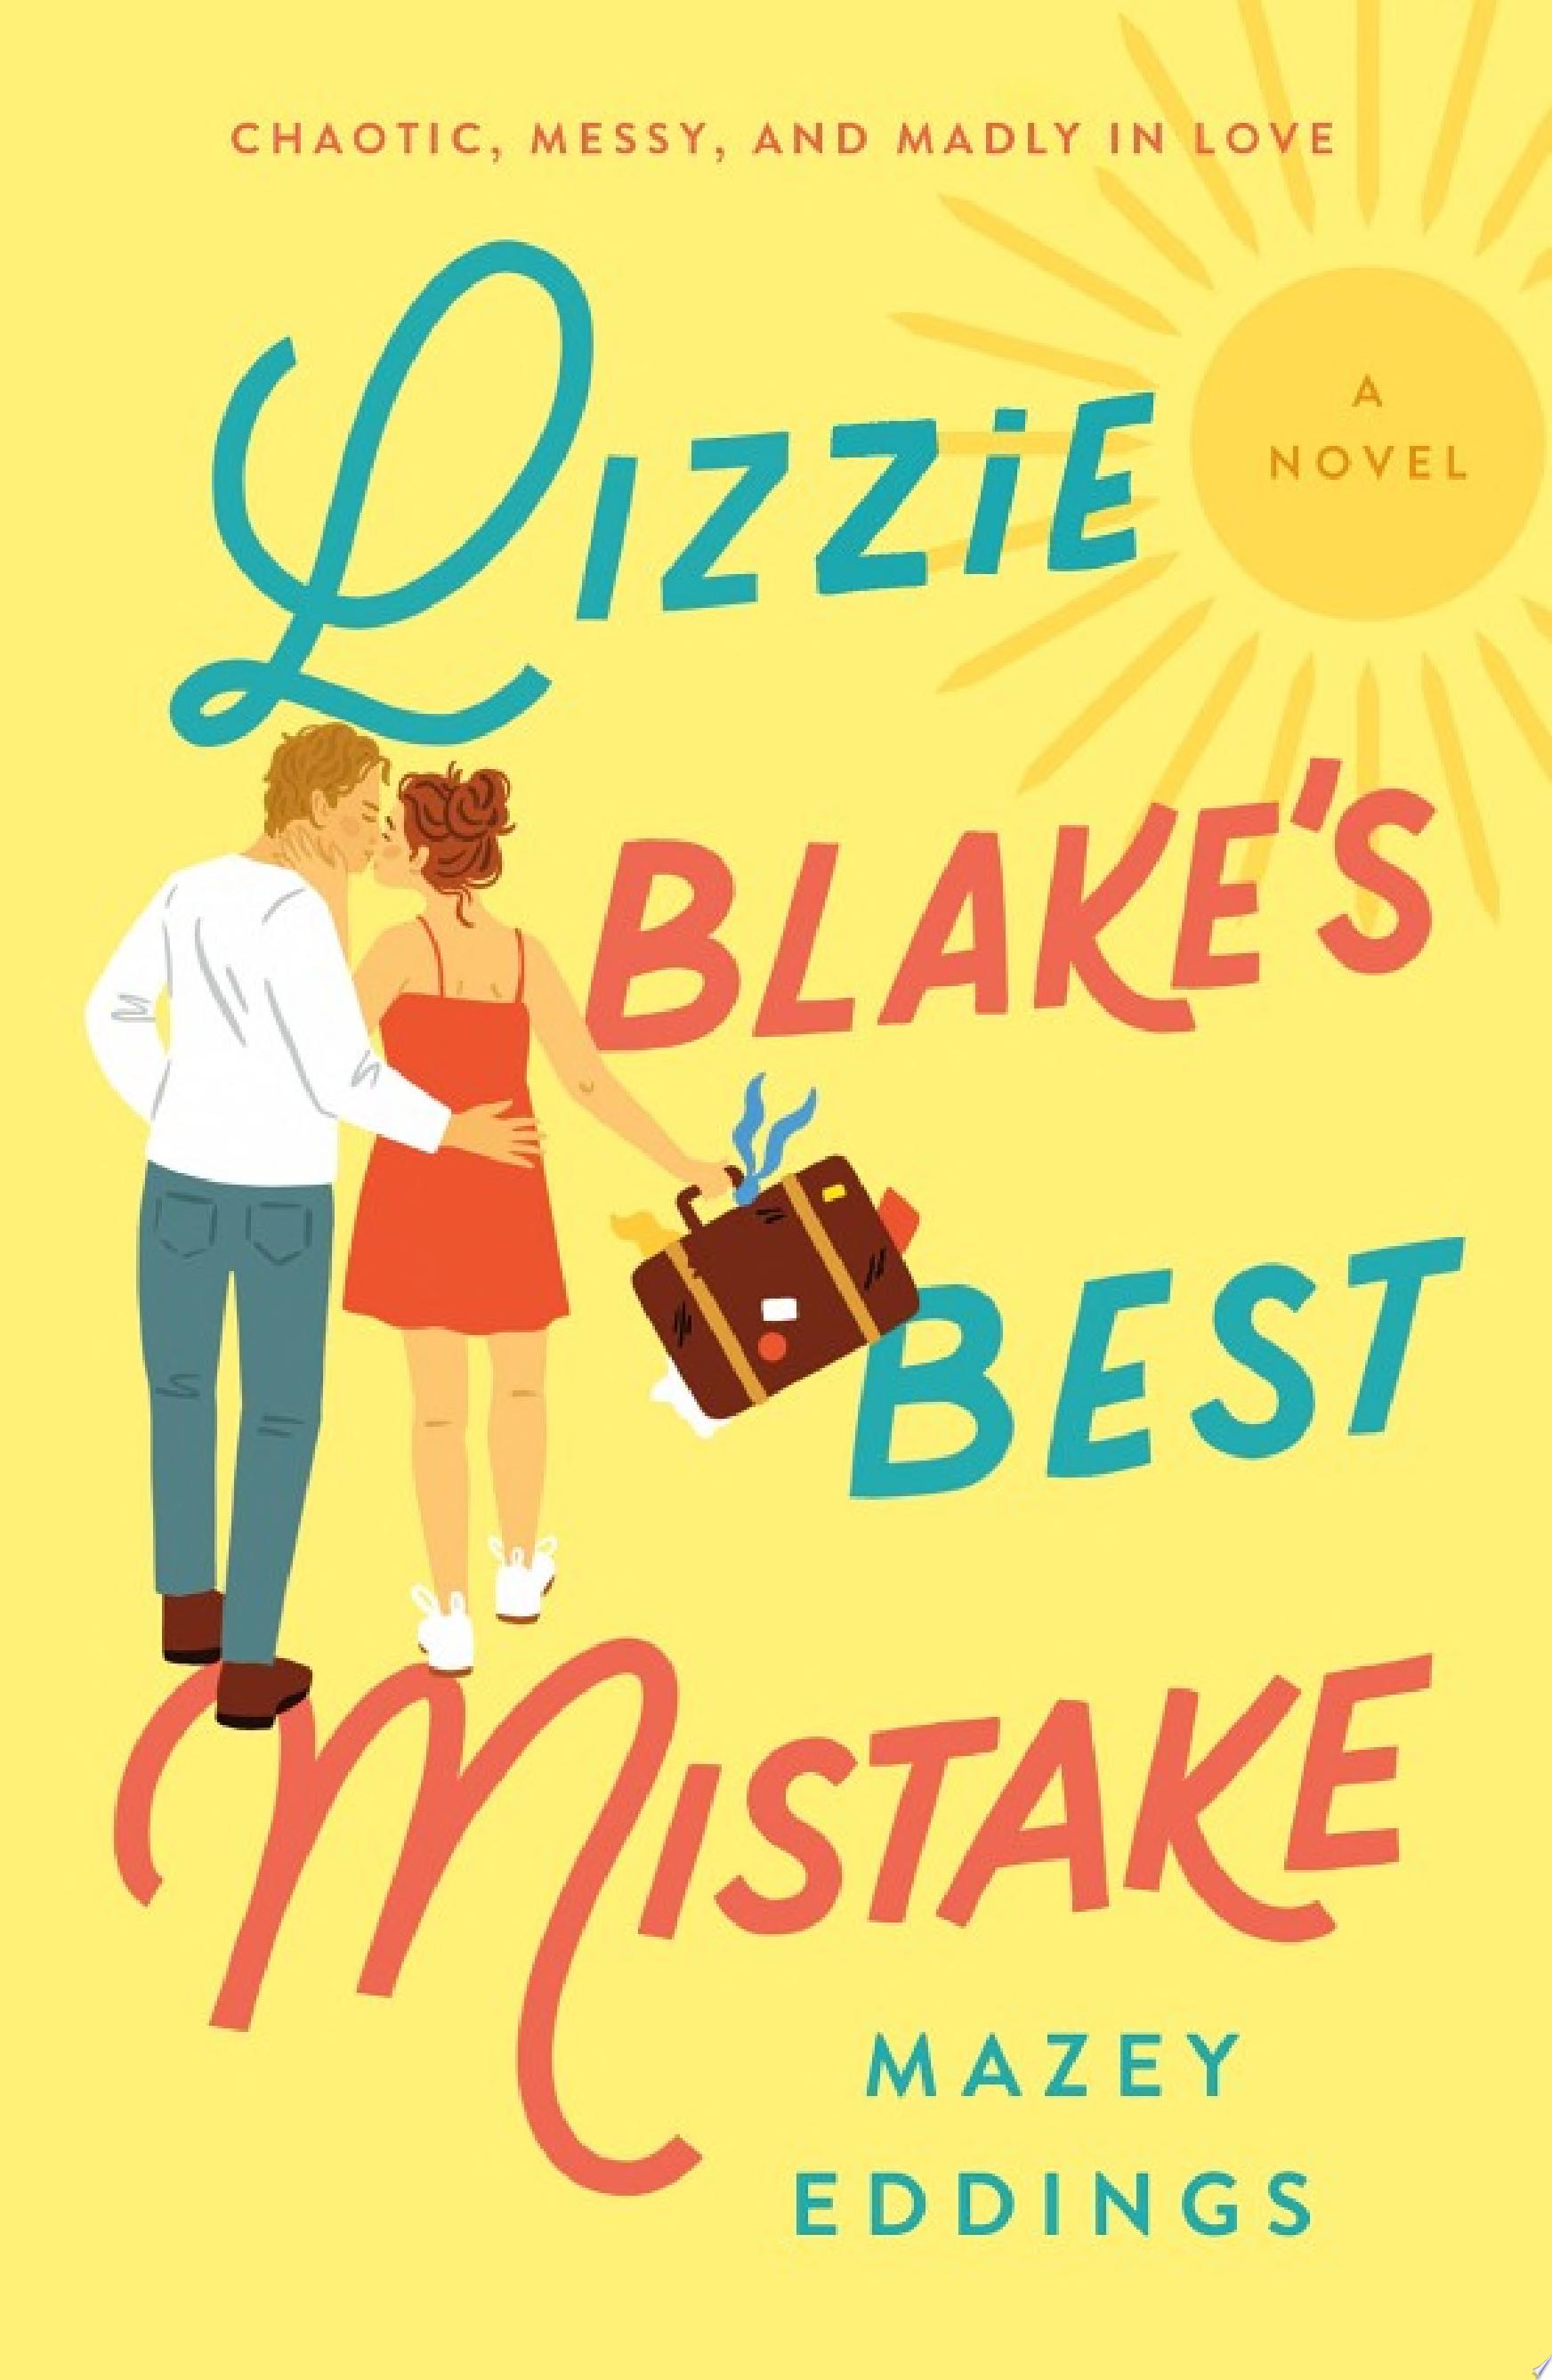 Image for "Lizzie Blake's Best Mistake"